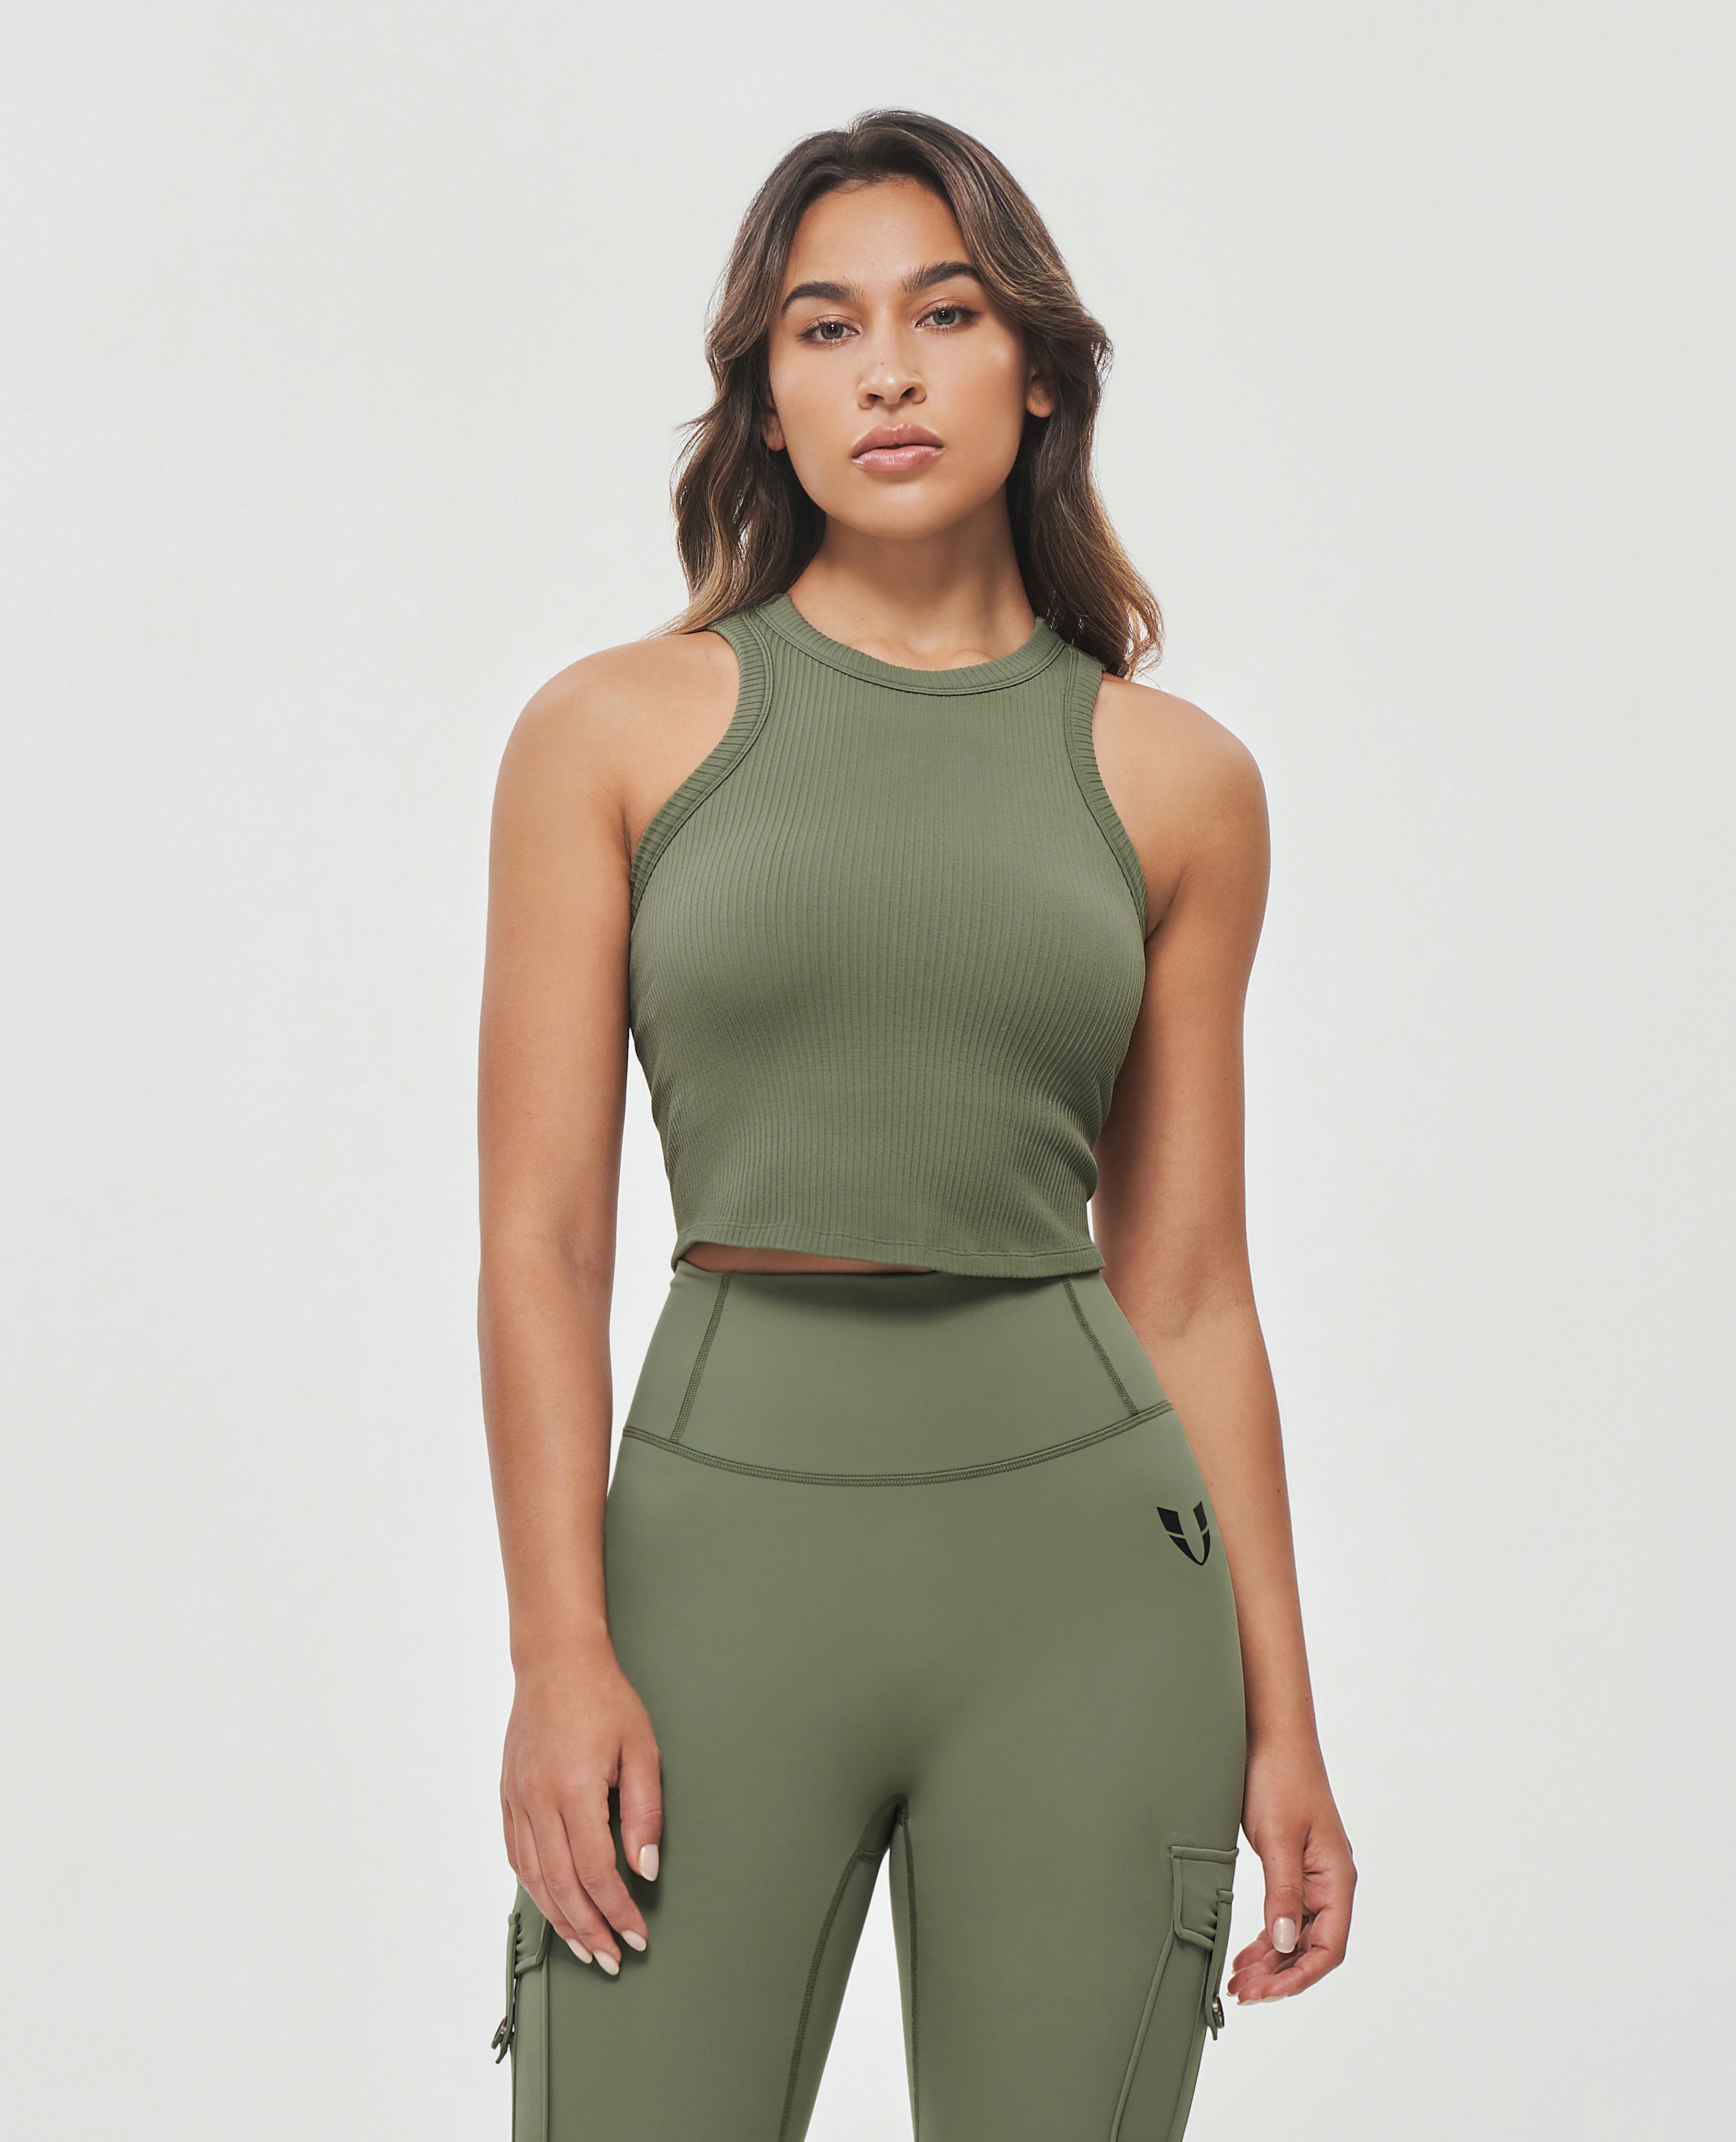 Padded Workout Tank - Olive Green